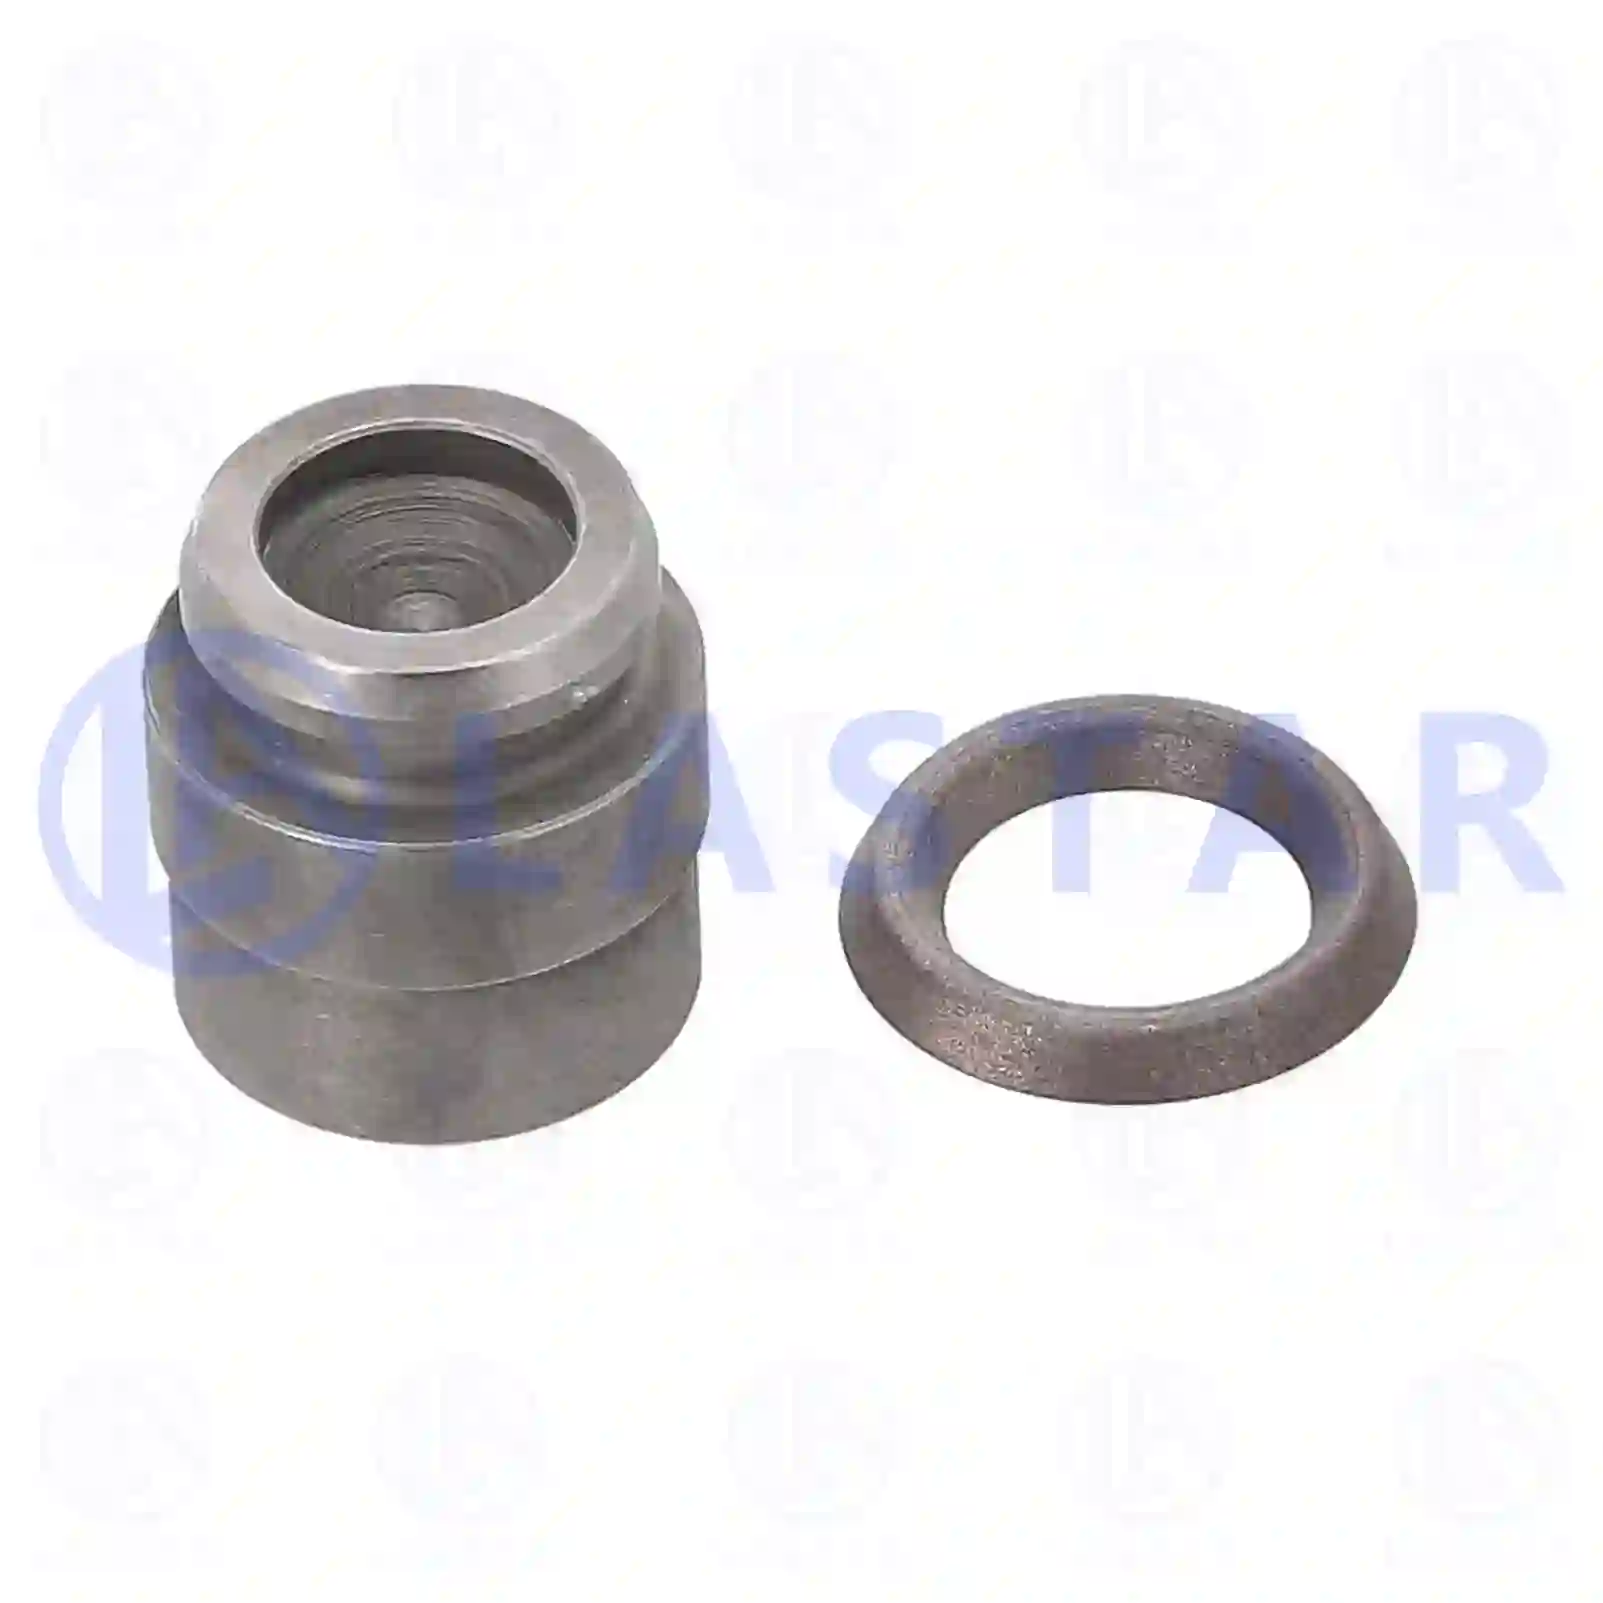 Piston, constant throttle, with seal ring, 77701970, 9060100189, , ||  77701970 Lastar Spare Part | Truck Spare Parts, Auotomotive Spare Parts Piston, constant throttle, with seal ring, 77701970, 9060100189, , ||  77701970 Lastar Spare Part | Truck Spare Parts, Auotomotive Spare Parts